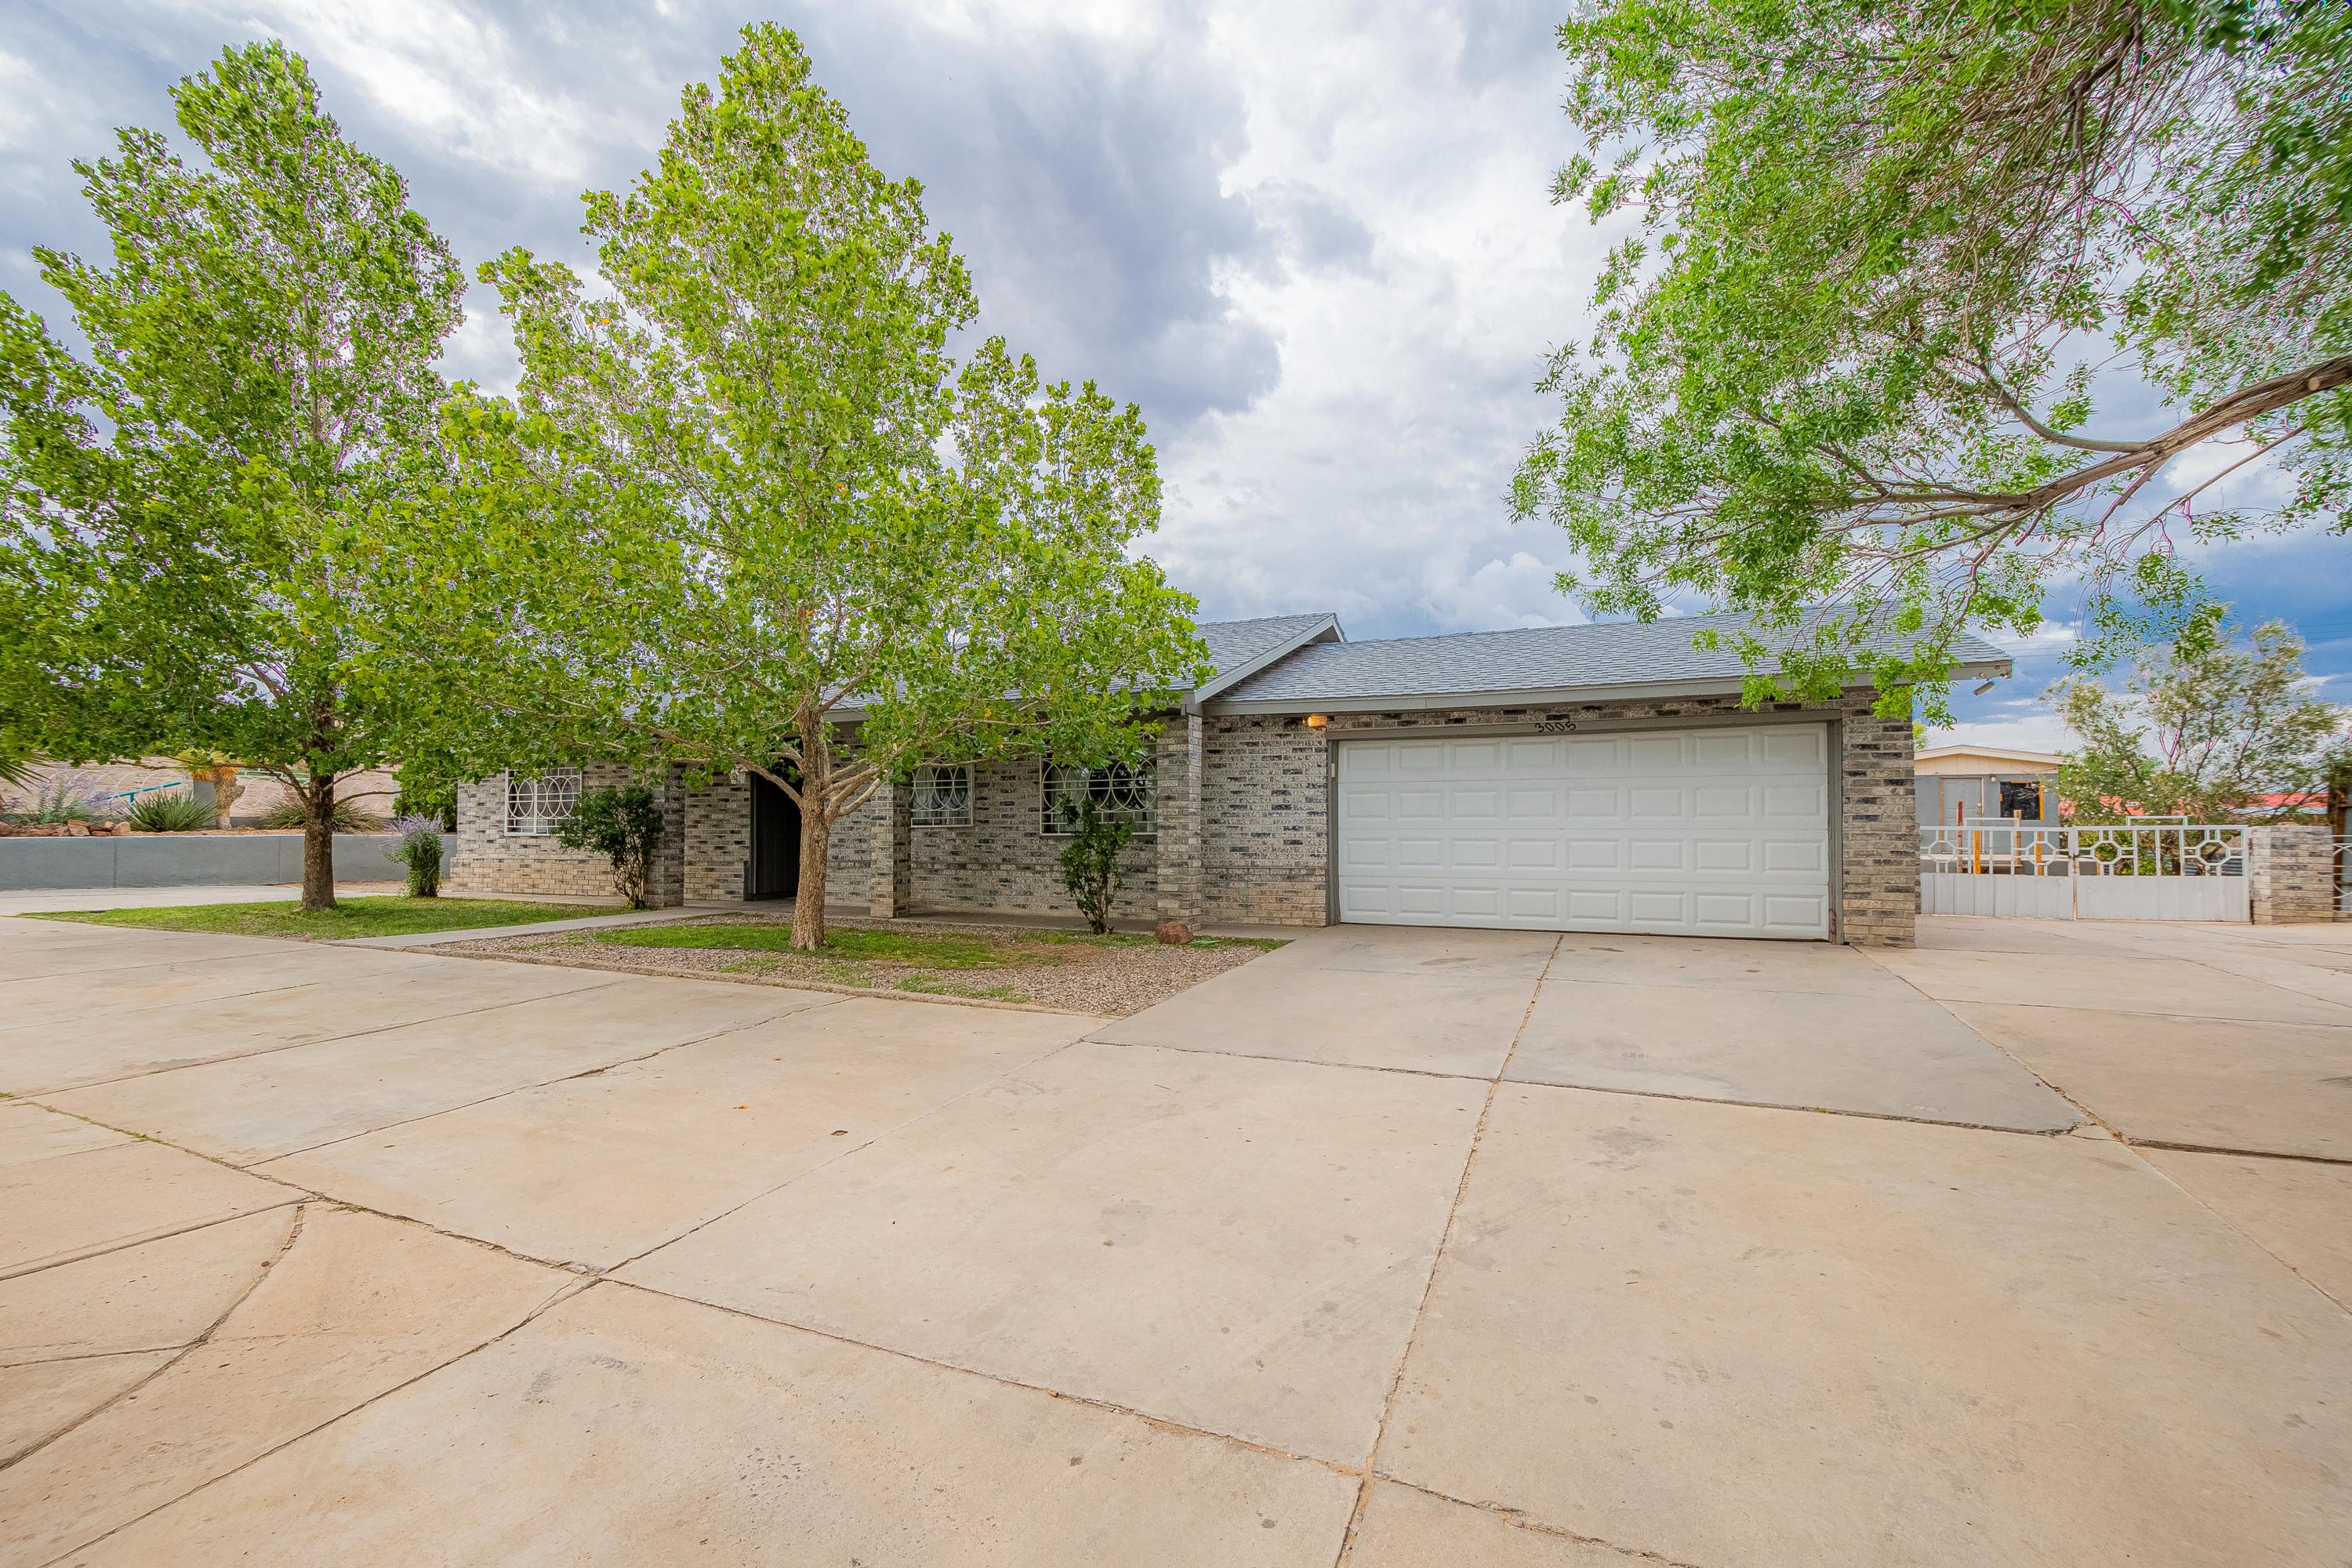 The home you've been looking for just went on the market! This 3 bedroom, 2 bath home sits on .50 of an acre, with plenty of room for your outside toys, animals and backyard access as well. Don't miss out on this South Valley dream home.